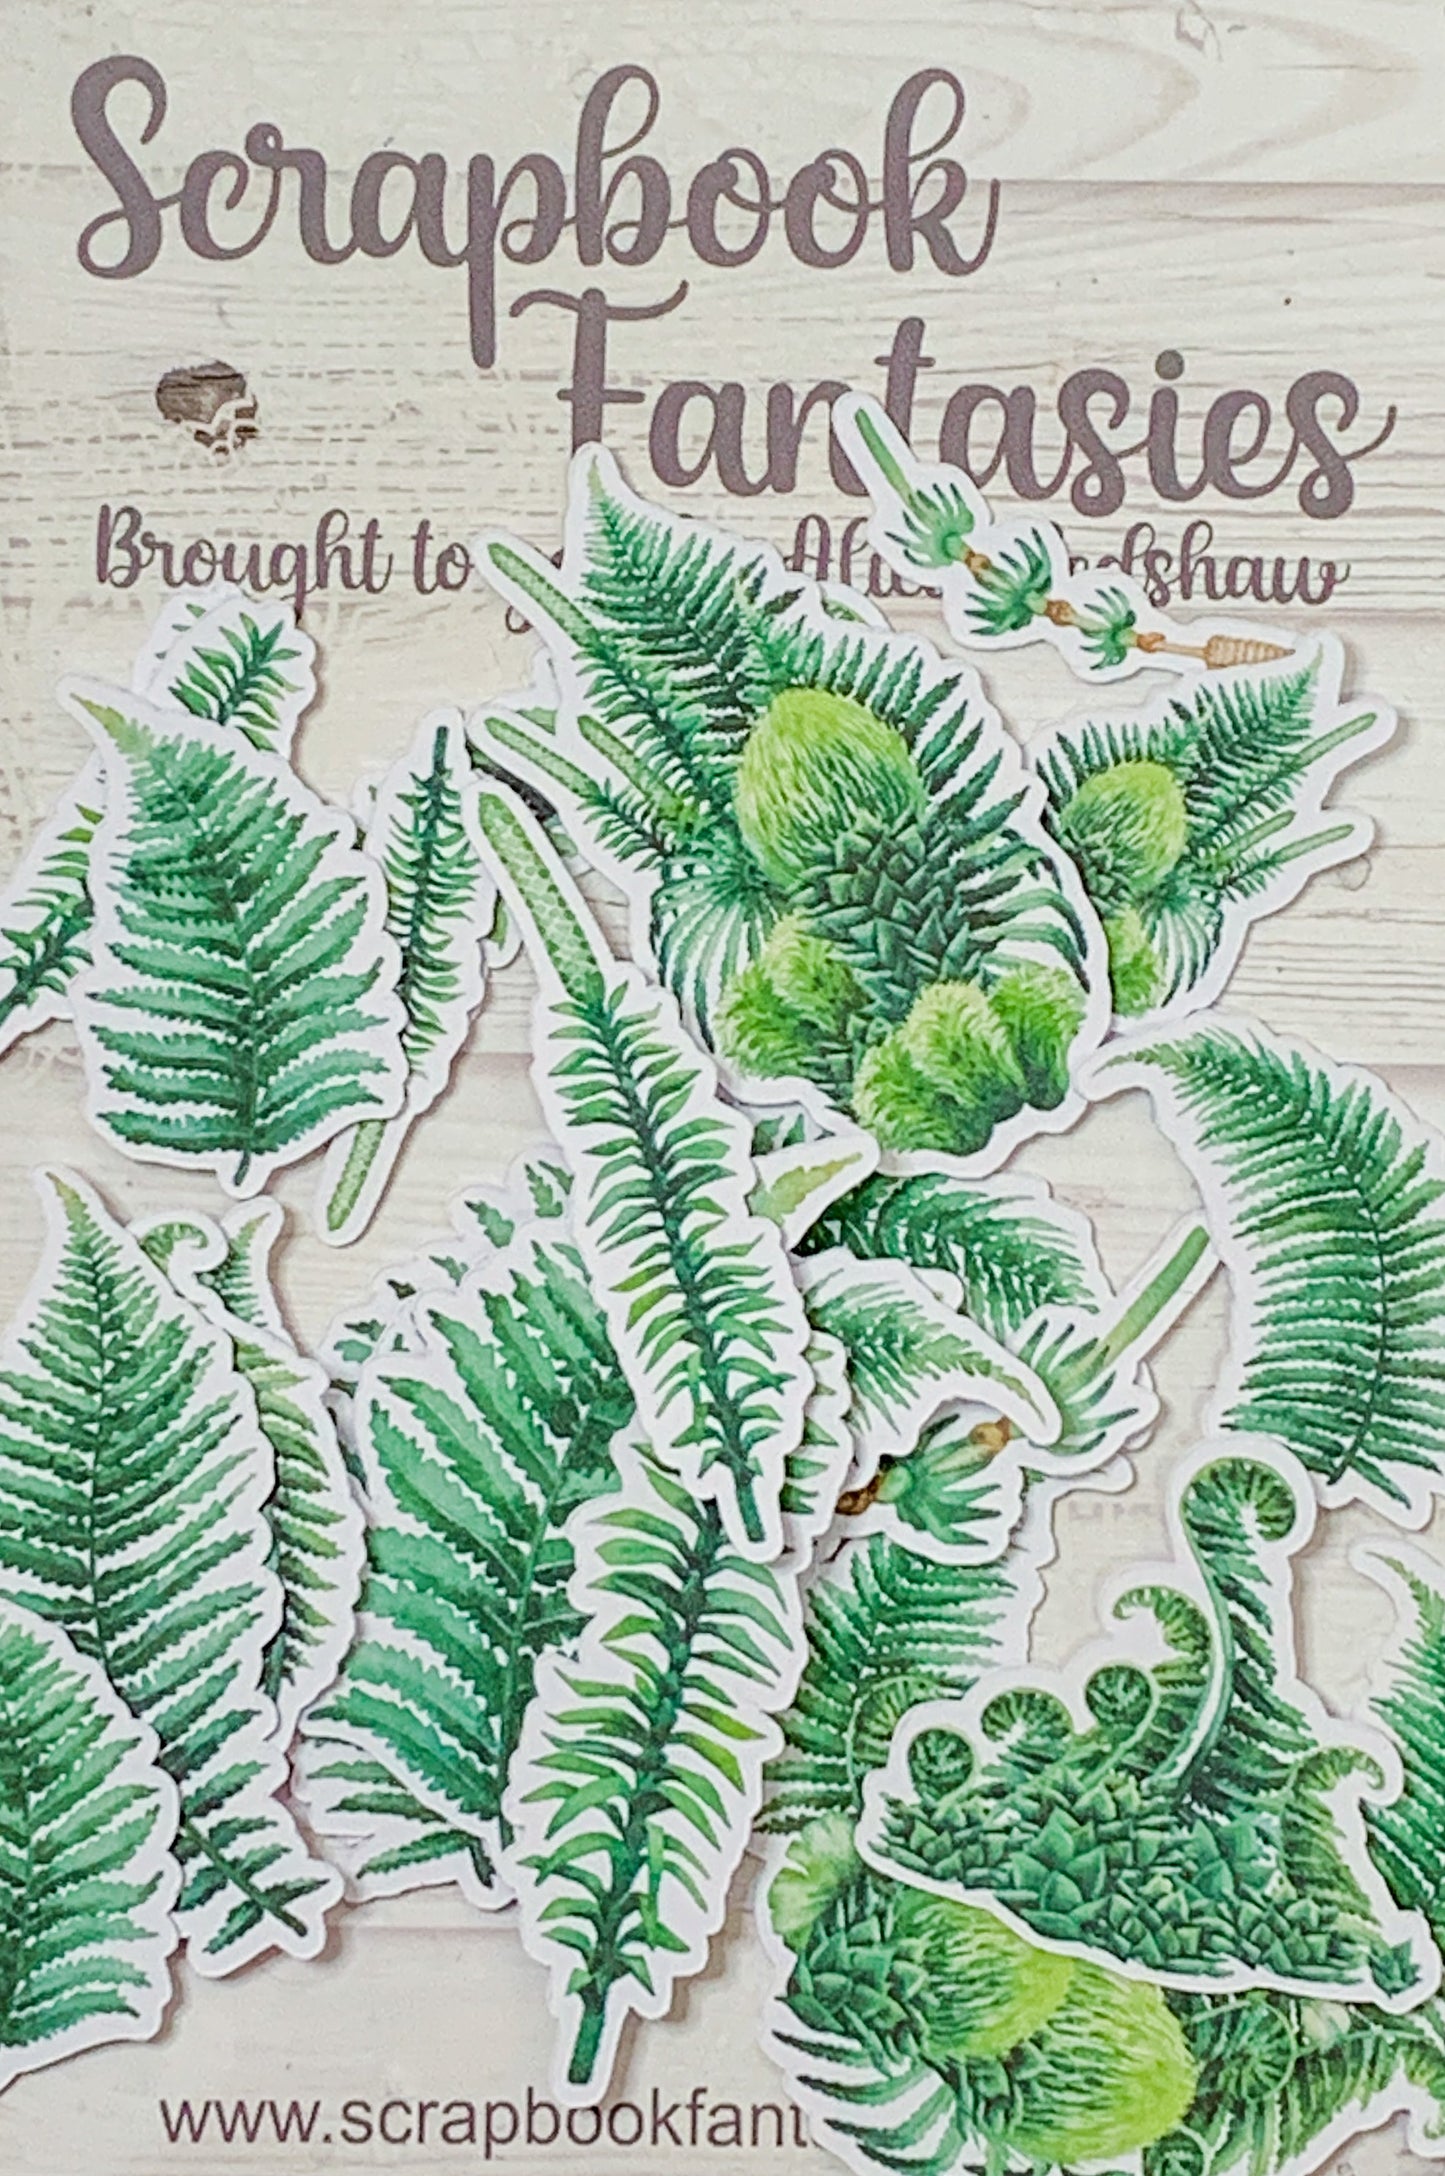 DinoWorld Colour-Cuts Minis - Dino-Ferns (22 pieces) Designed by Alicia Redshaw